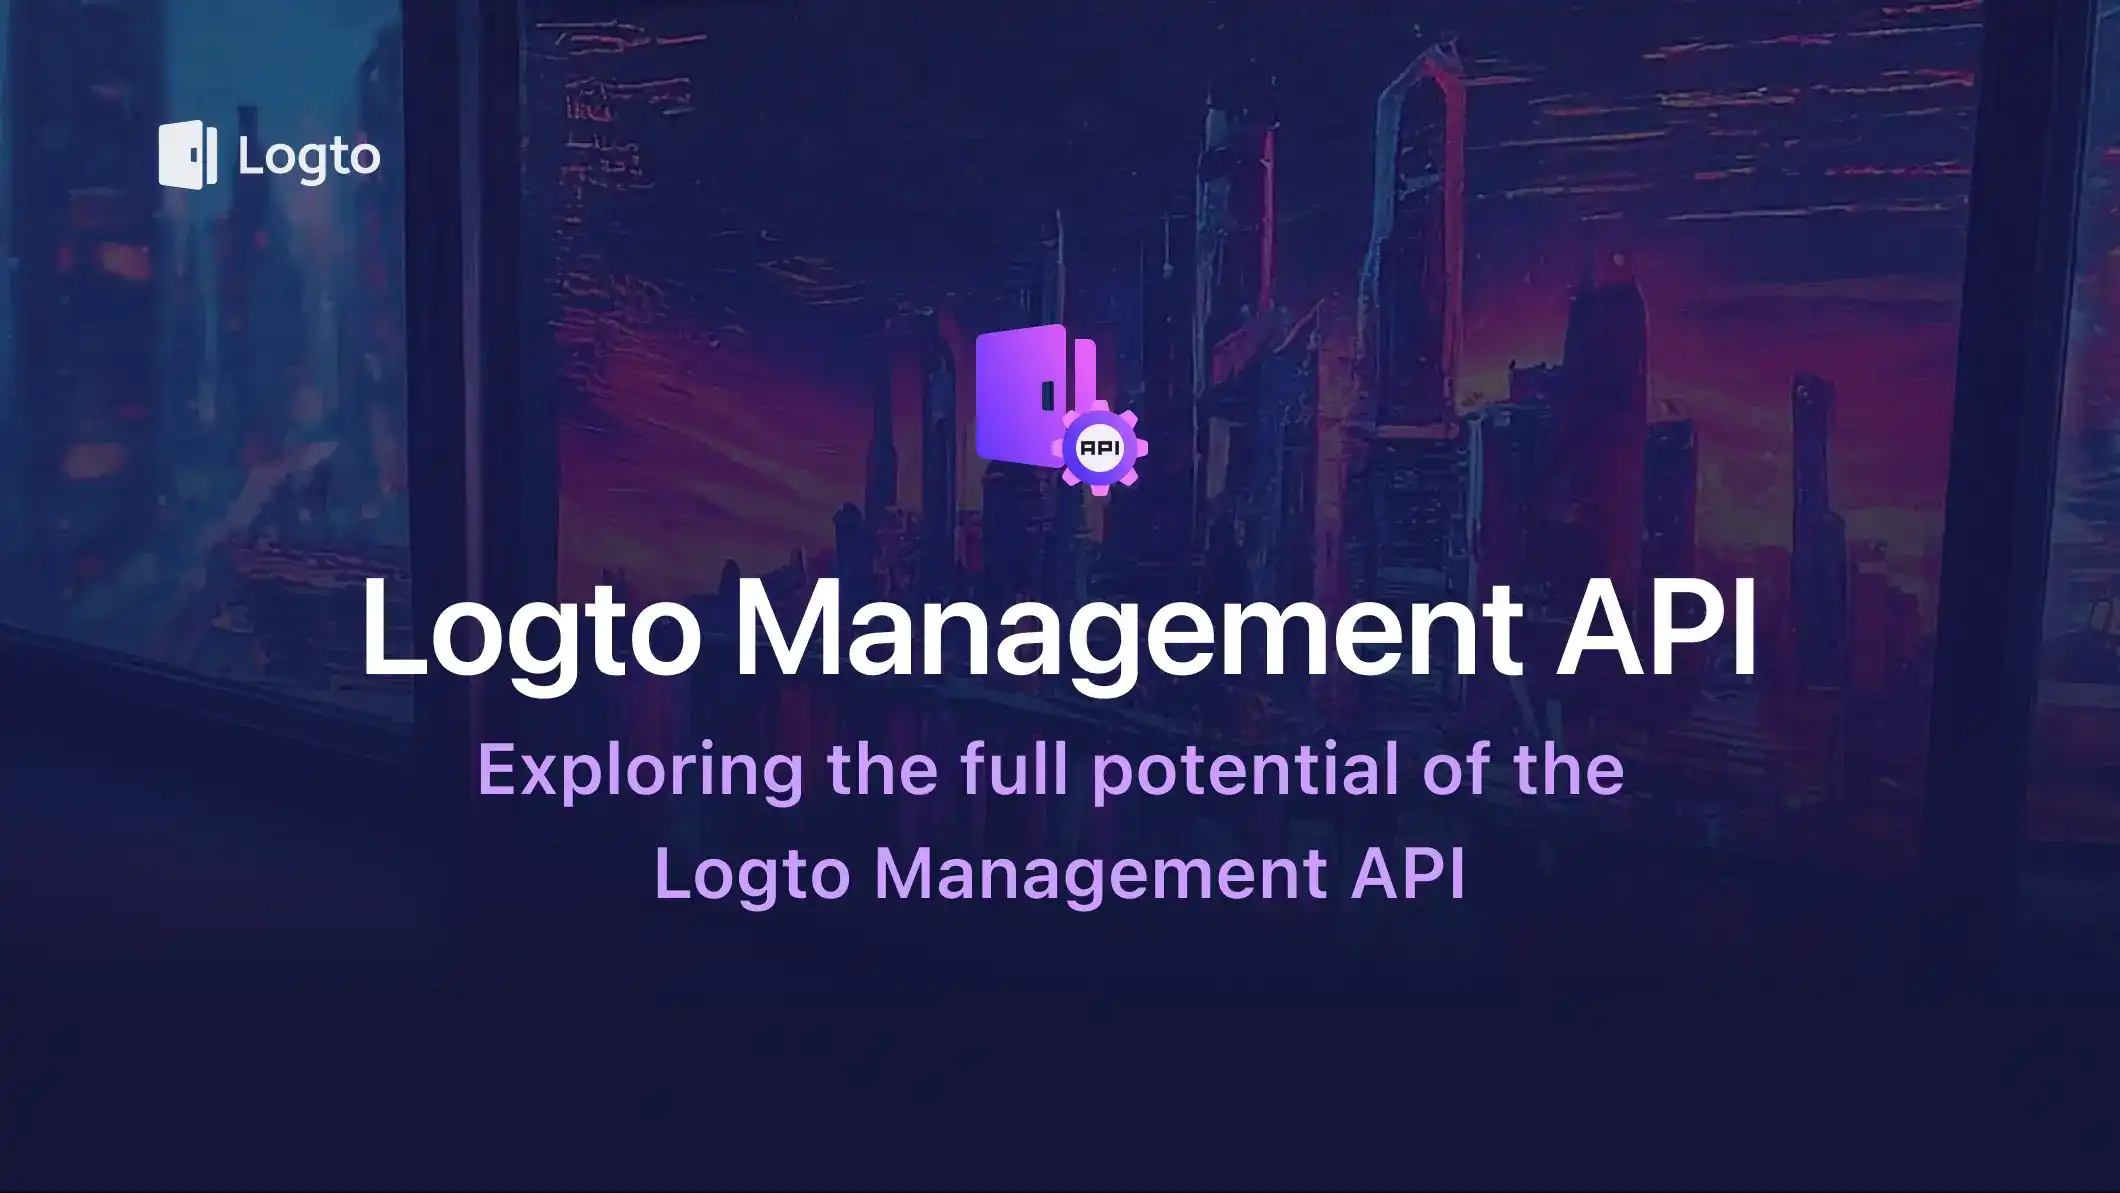 Exploring the full potential of the Logto Management API